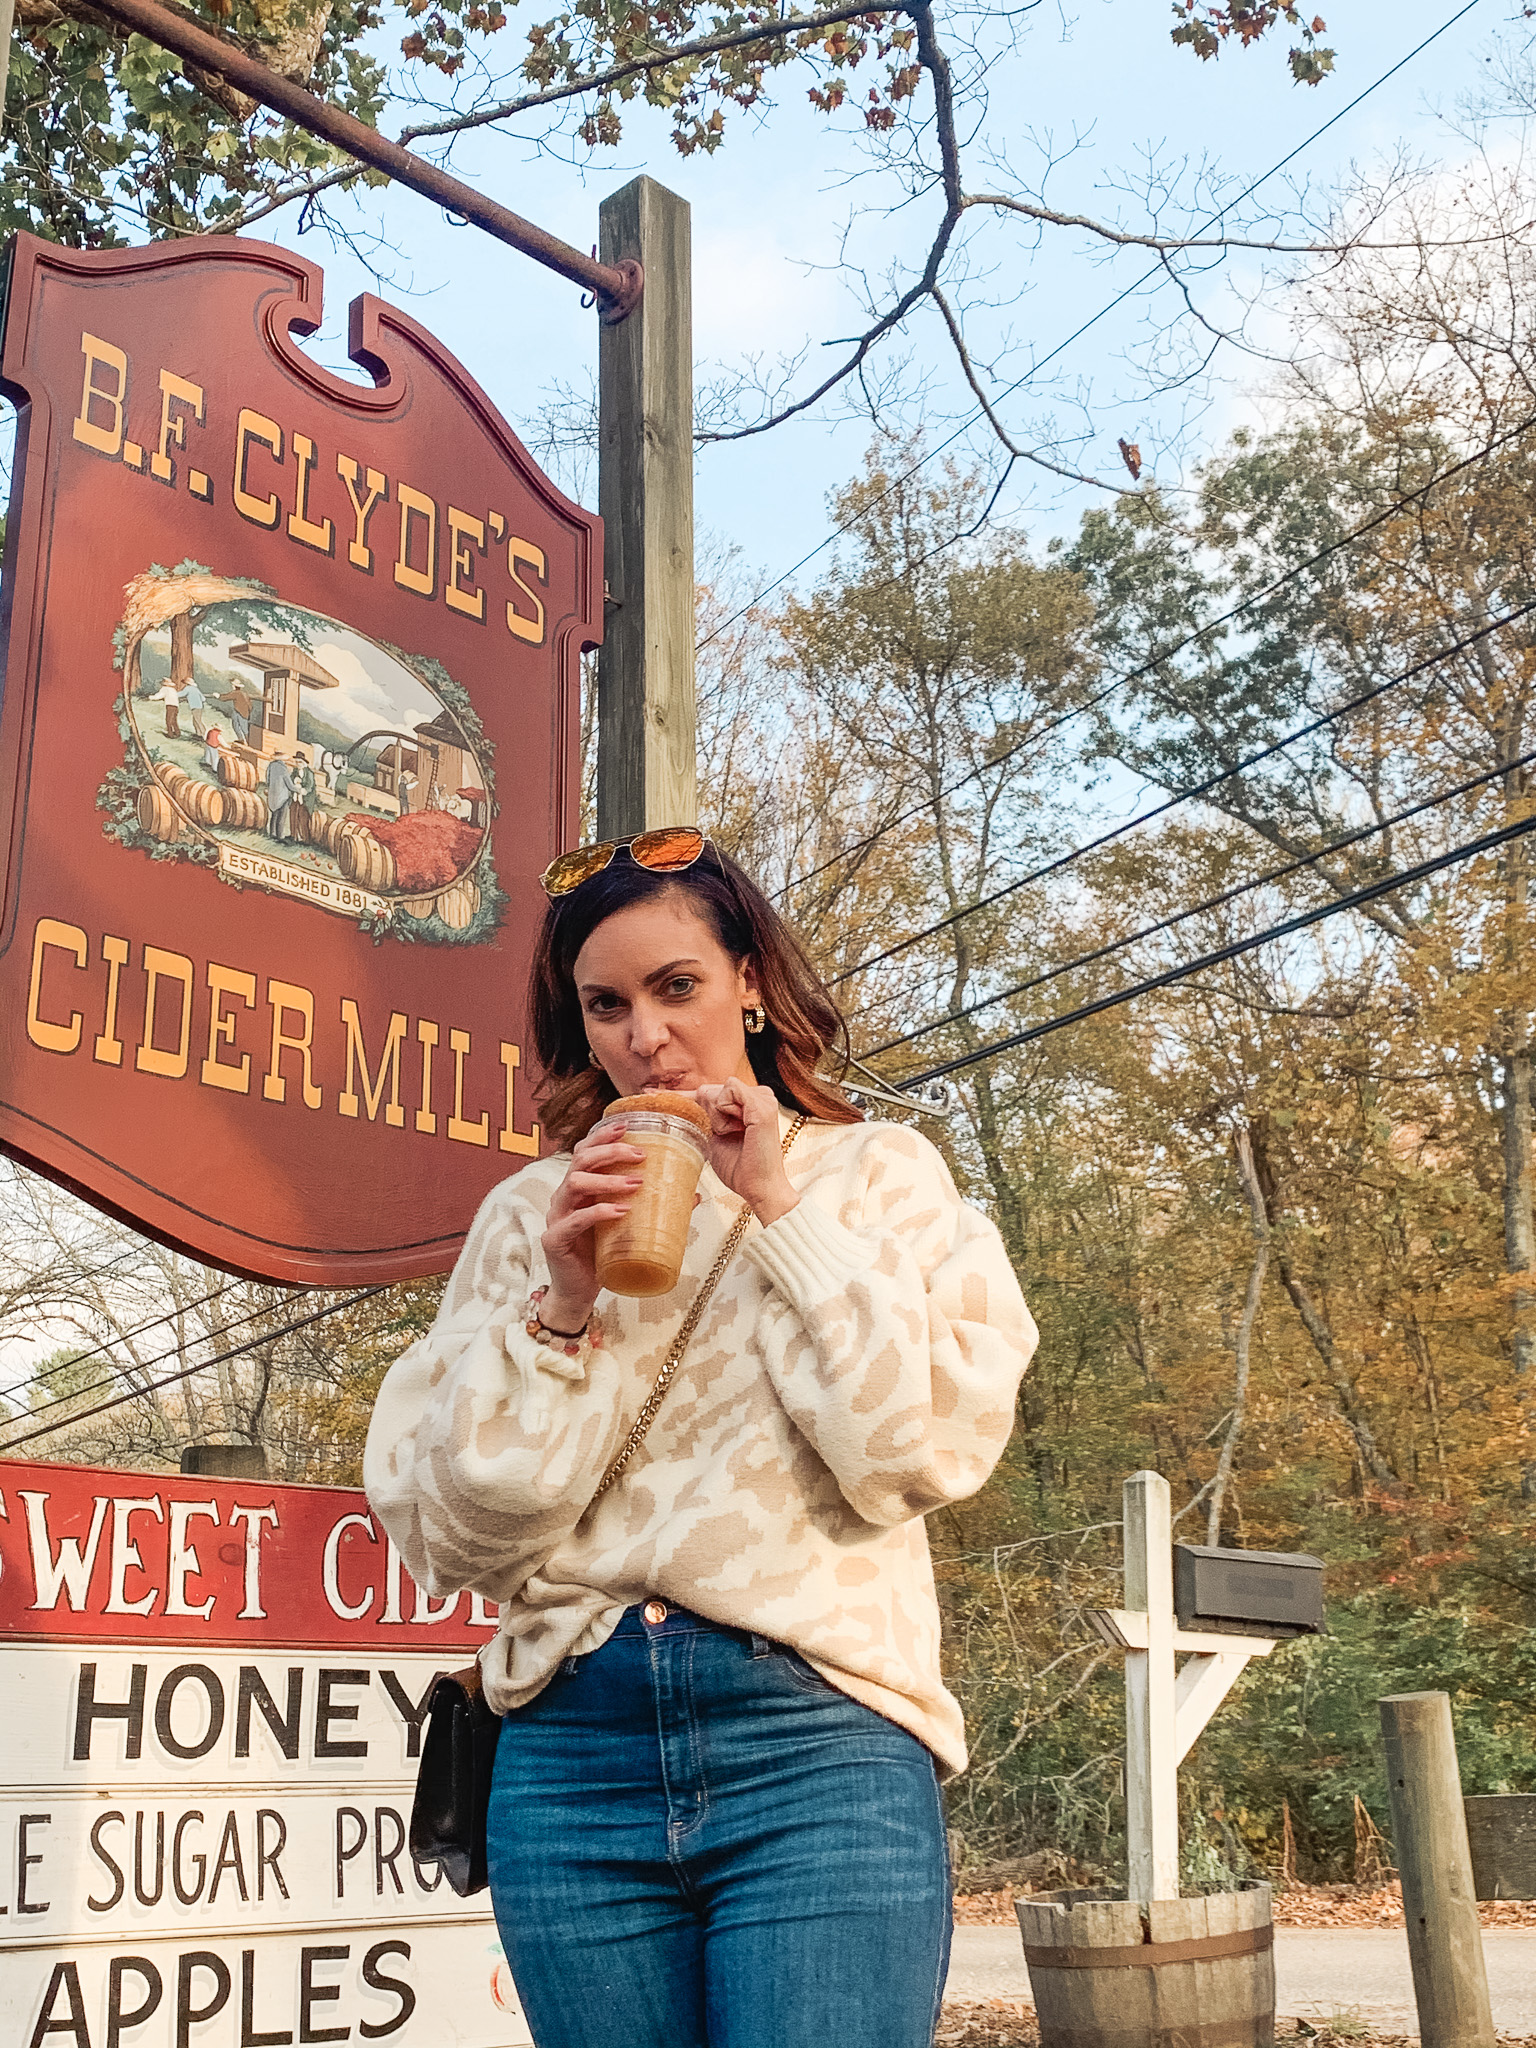 BF Clyde's Cider Mill is definitely worth visiting in Mystic CT